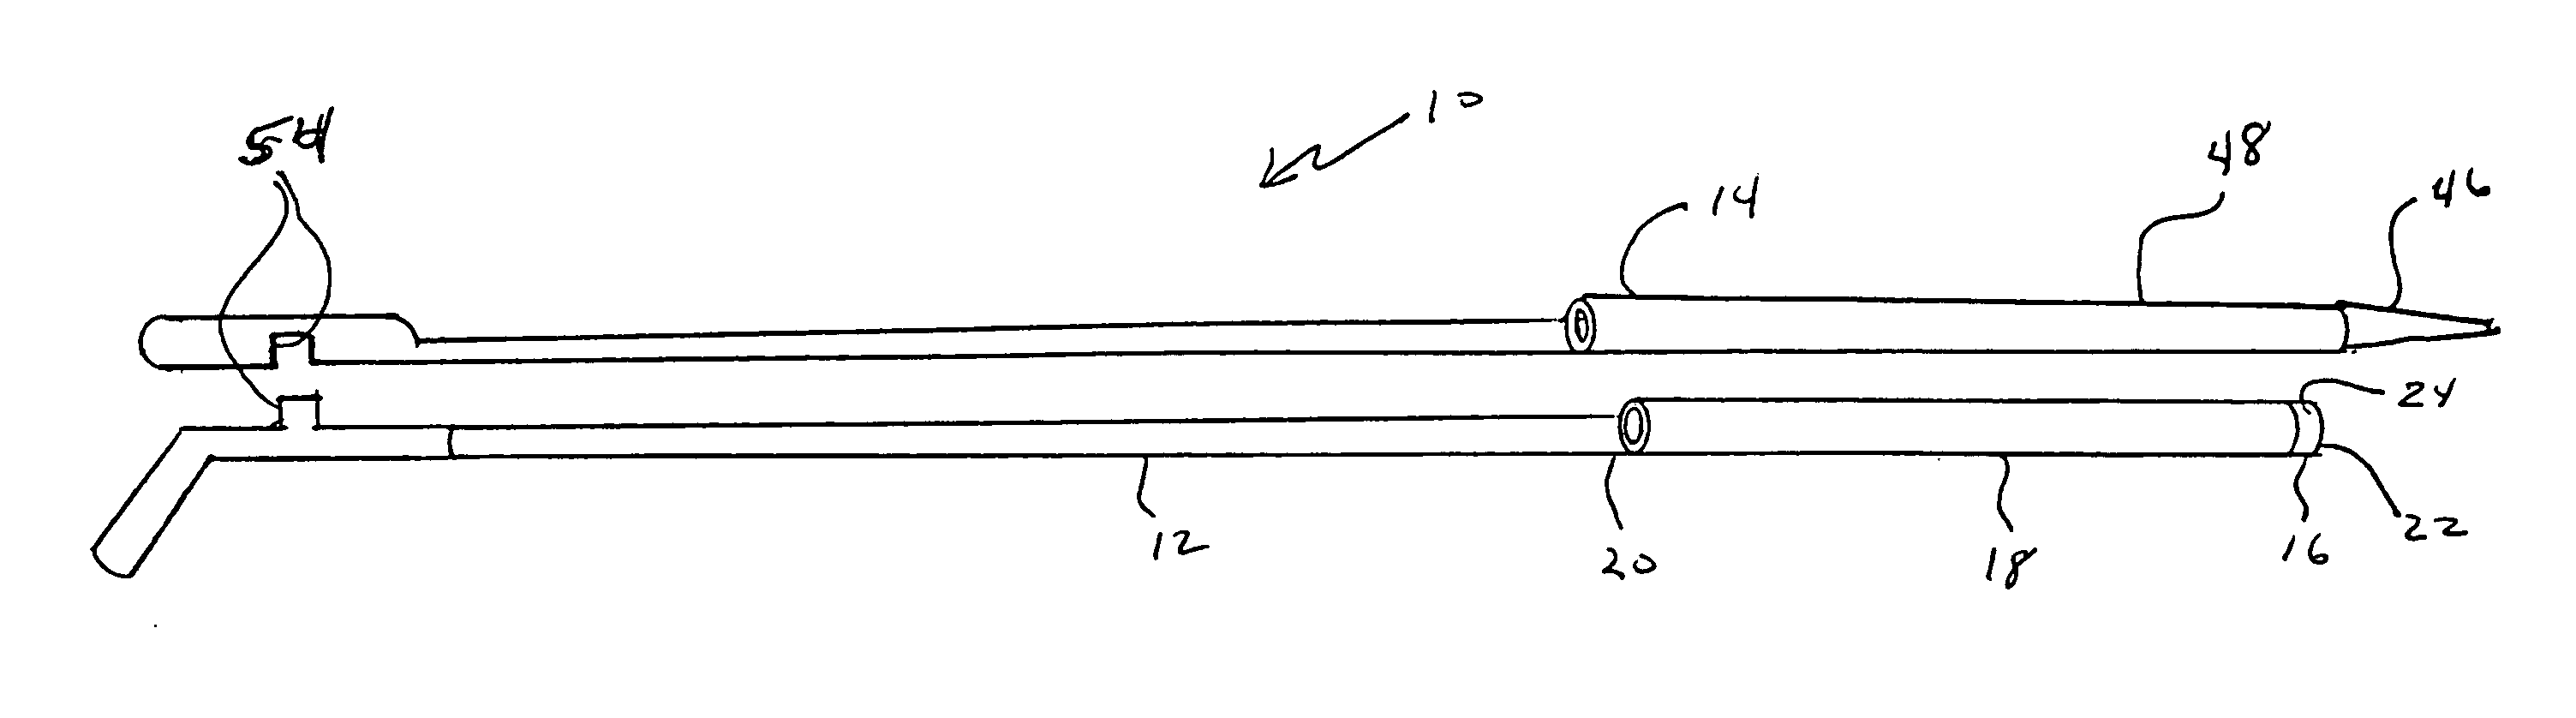 Coaxial guide catheter for interventional cardiology procedures